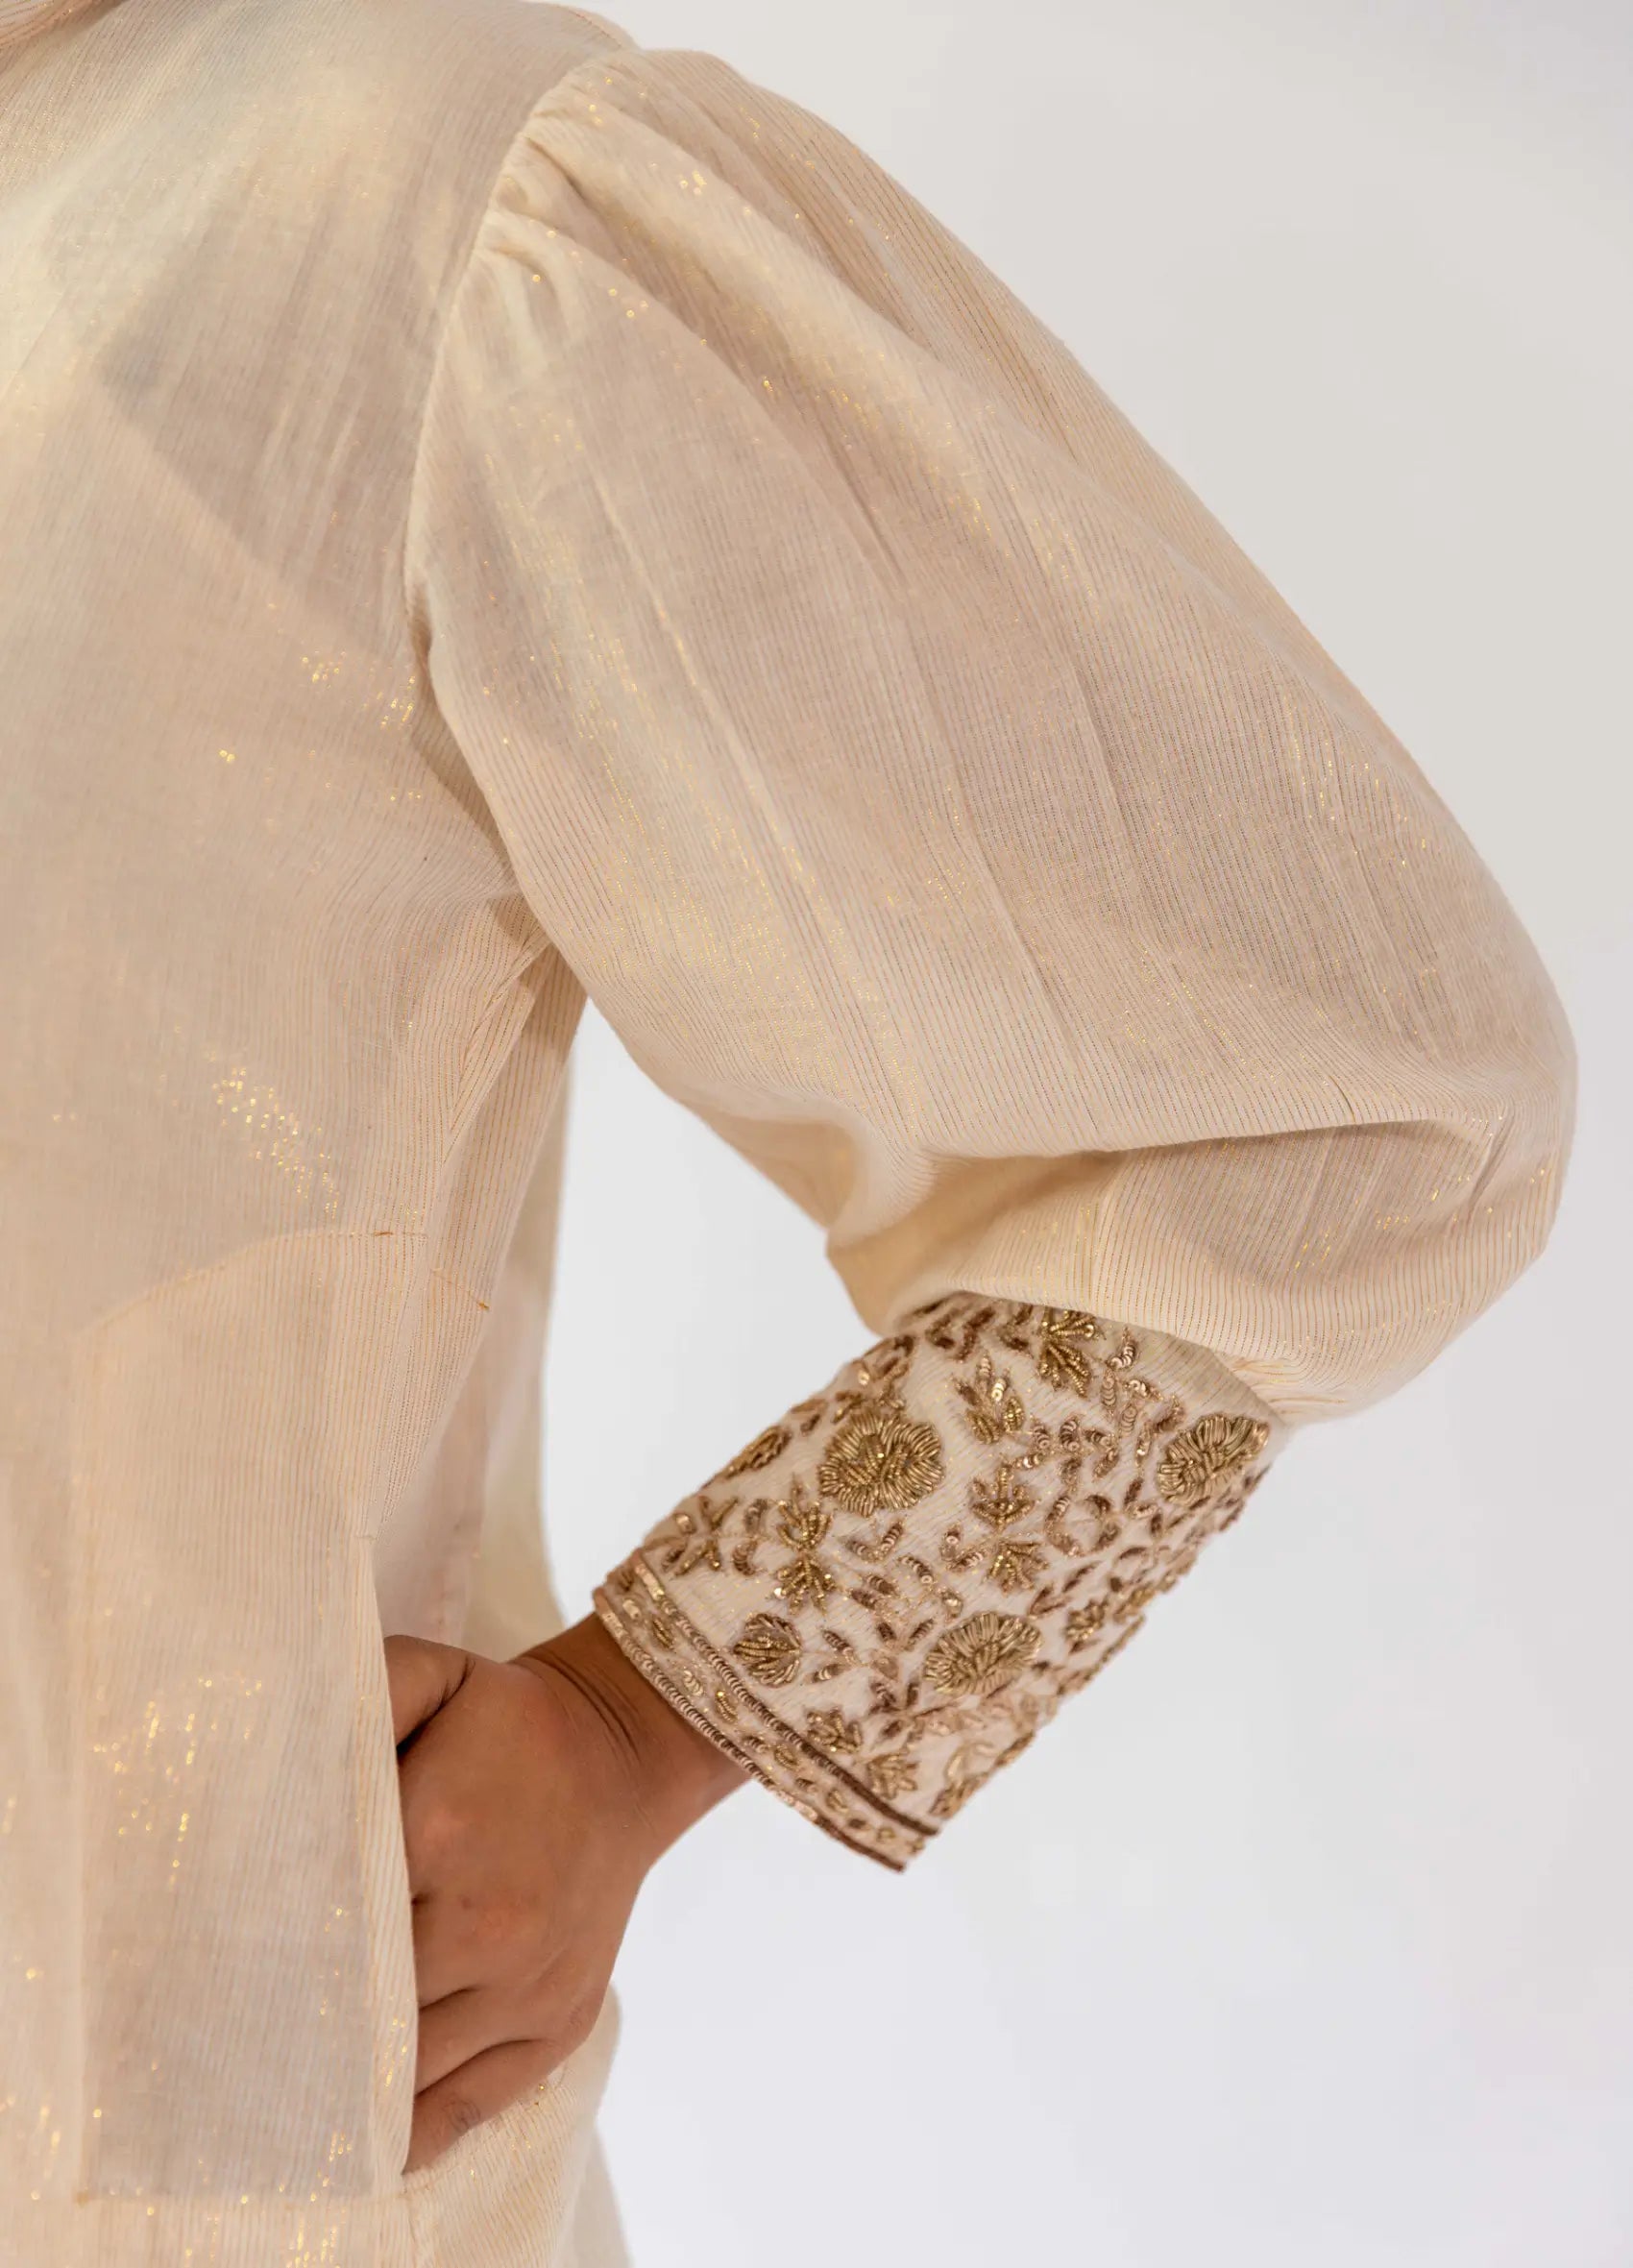 Ivory Long Shirt, Inner With Handwork On The Cuff And Pants - Set Of Three